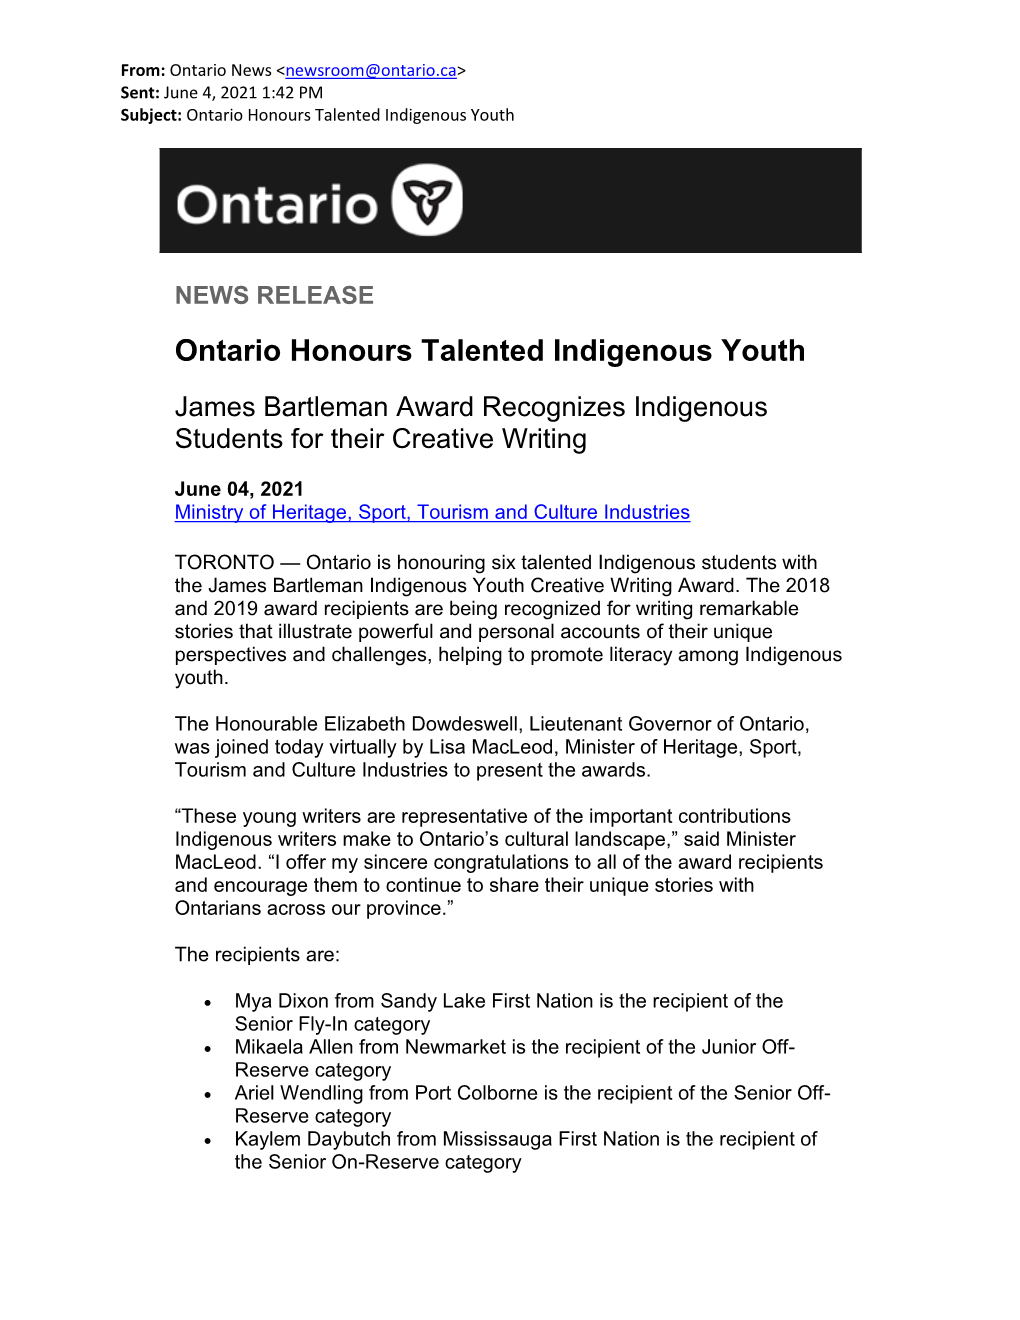 Ontario Honours Talented Indigenous Youth